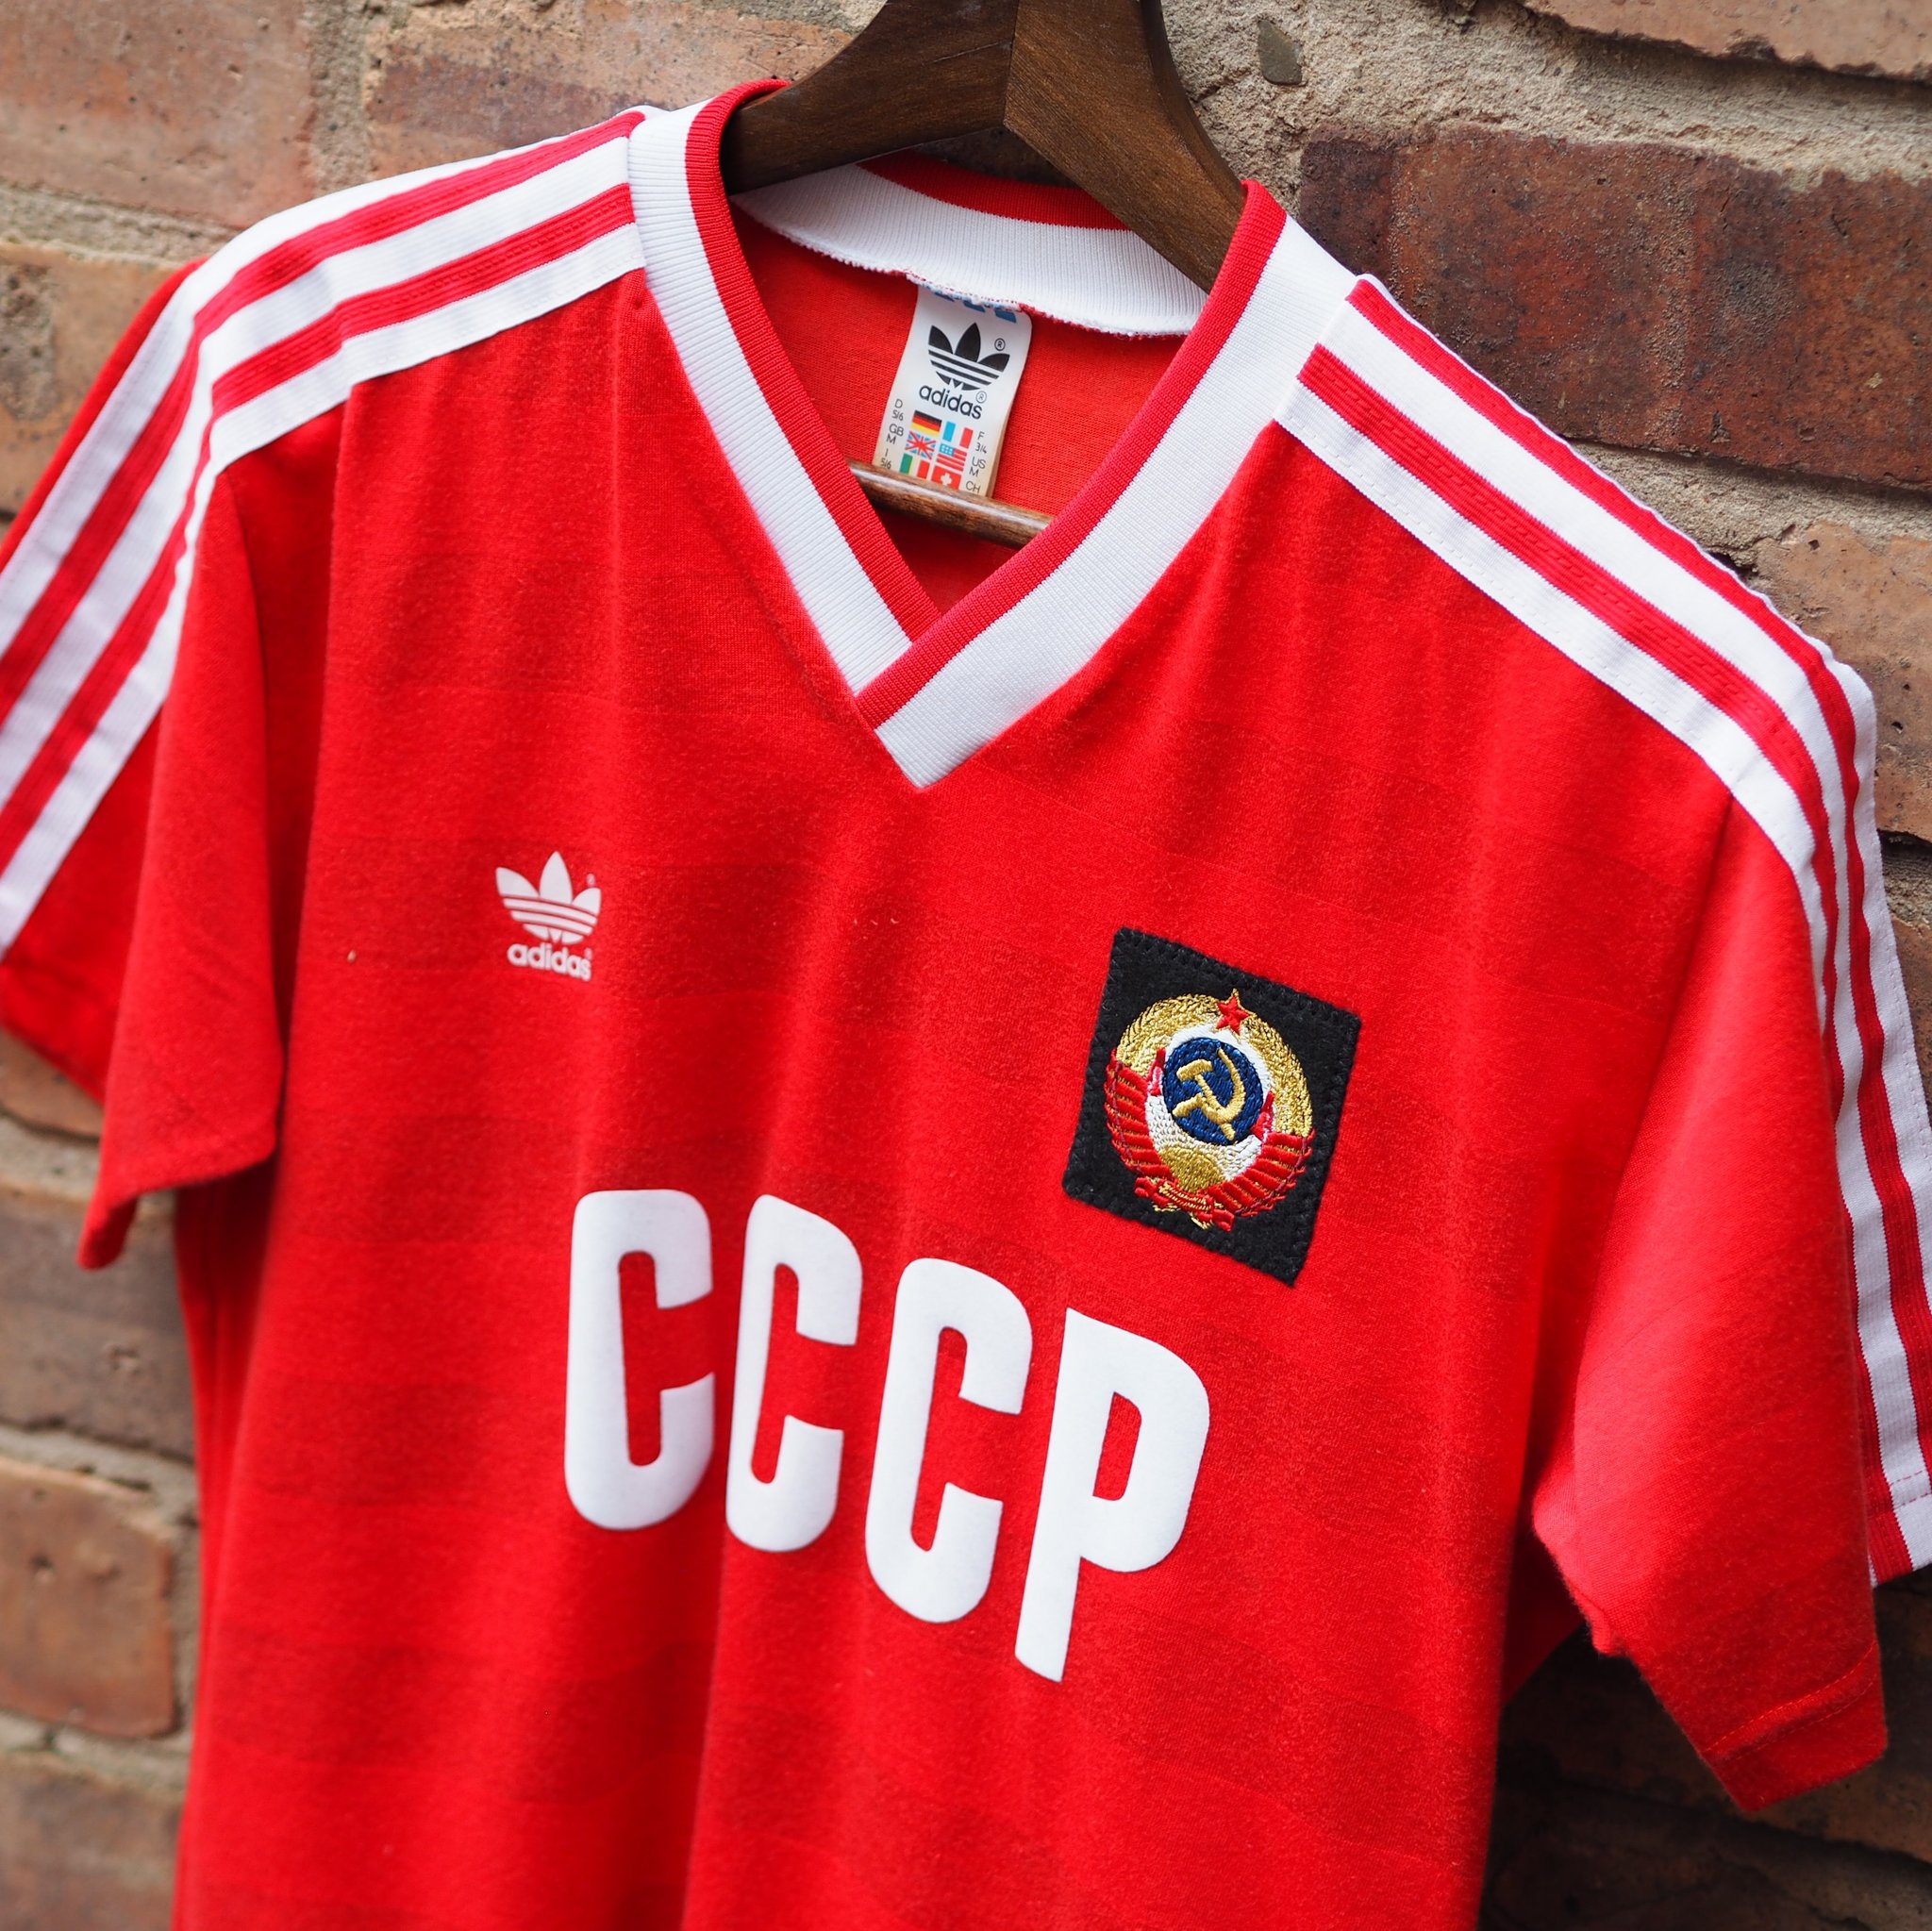 Vintage Football Shirts on X: "Soviet Union adidas home shirt as worn in  the '86 World Cup ☭ https://t.co/cIZsu5oPpJ" / X